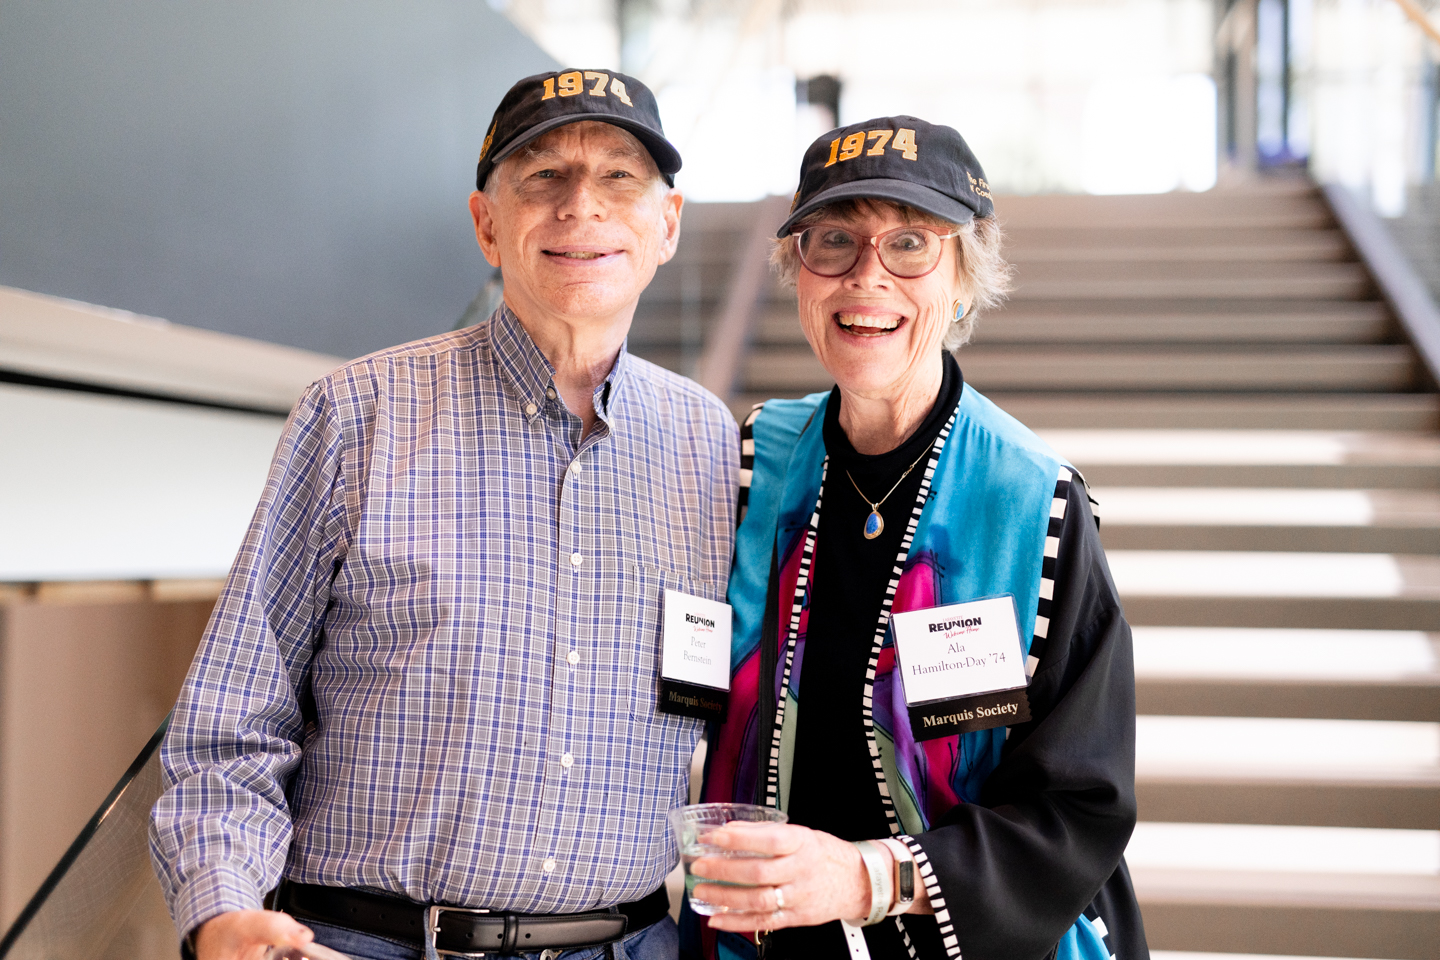 A man and woman pose for a photo on stairs in a modern academic building. They are wearing name tags